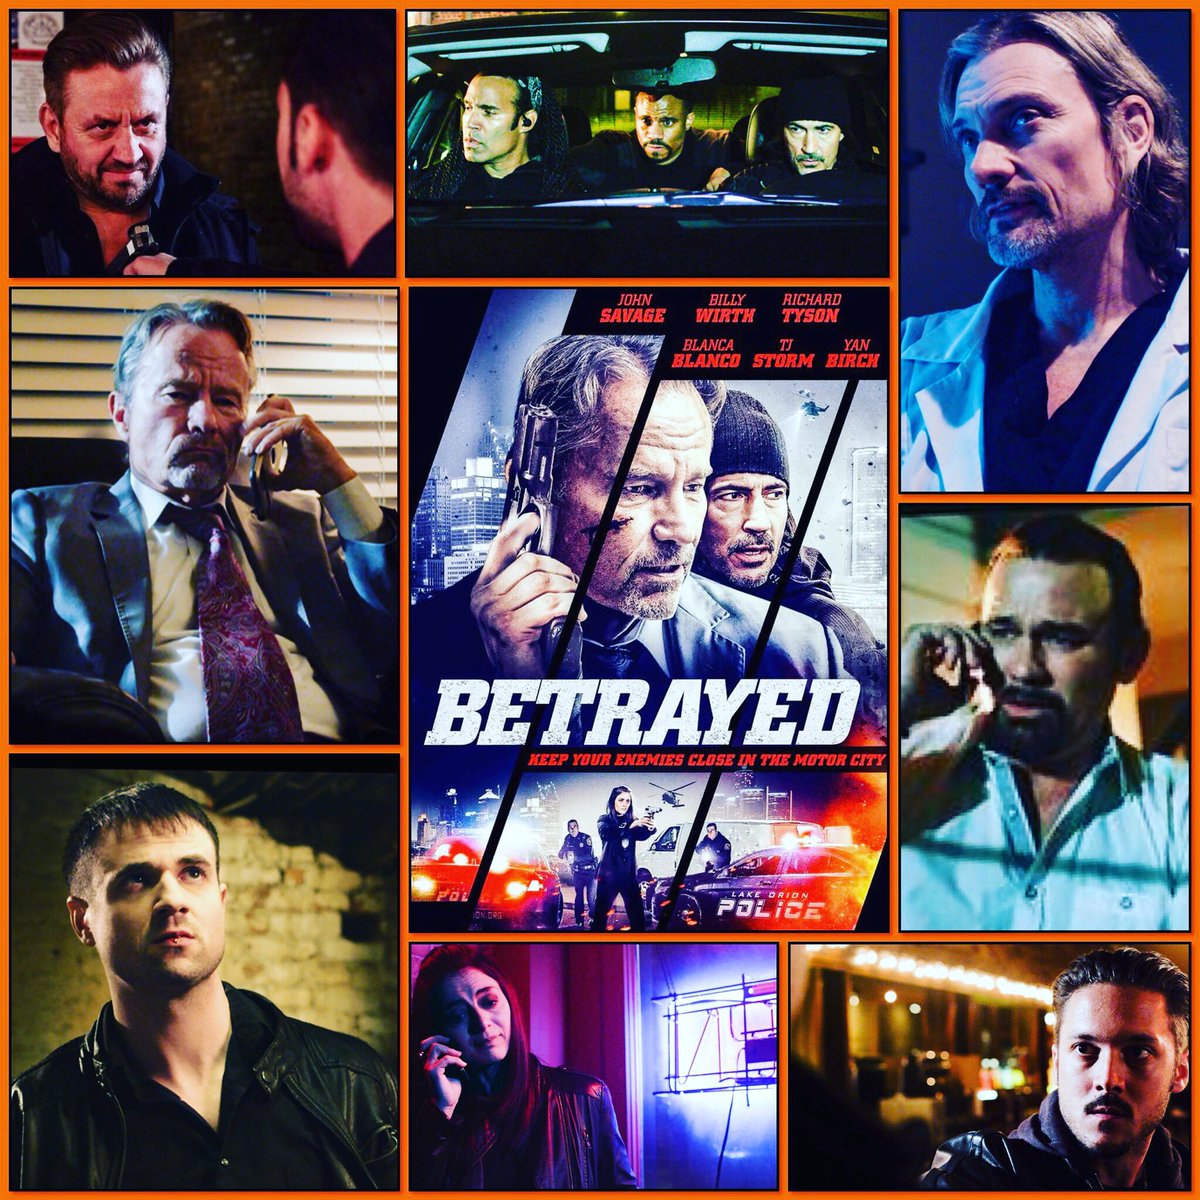 Very excited!!! Coming soon!!!
#betrayed #sonypictures #billywirth #richardtyson #harleywallen #johnsavage #yanbirch